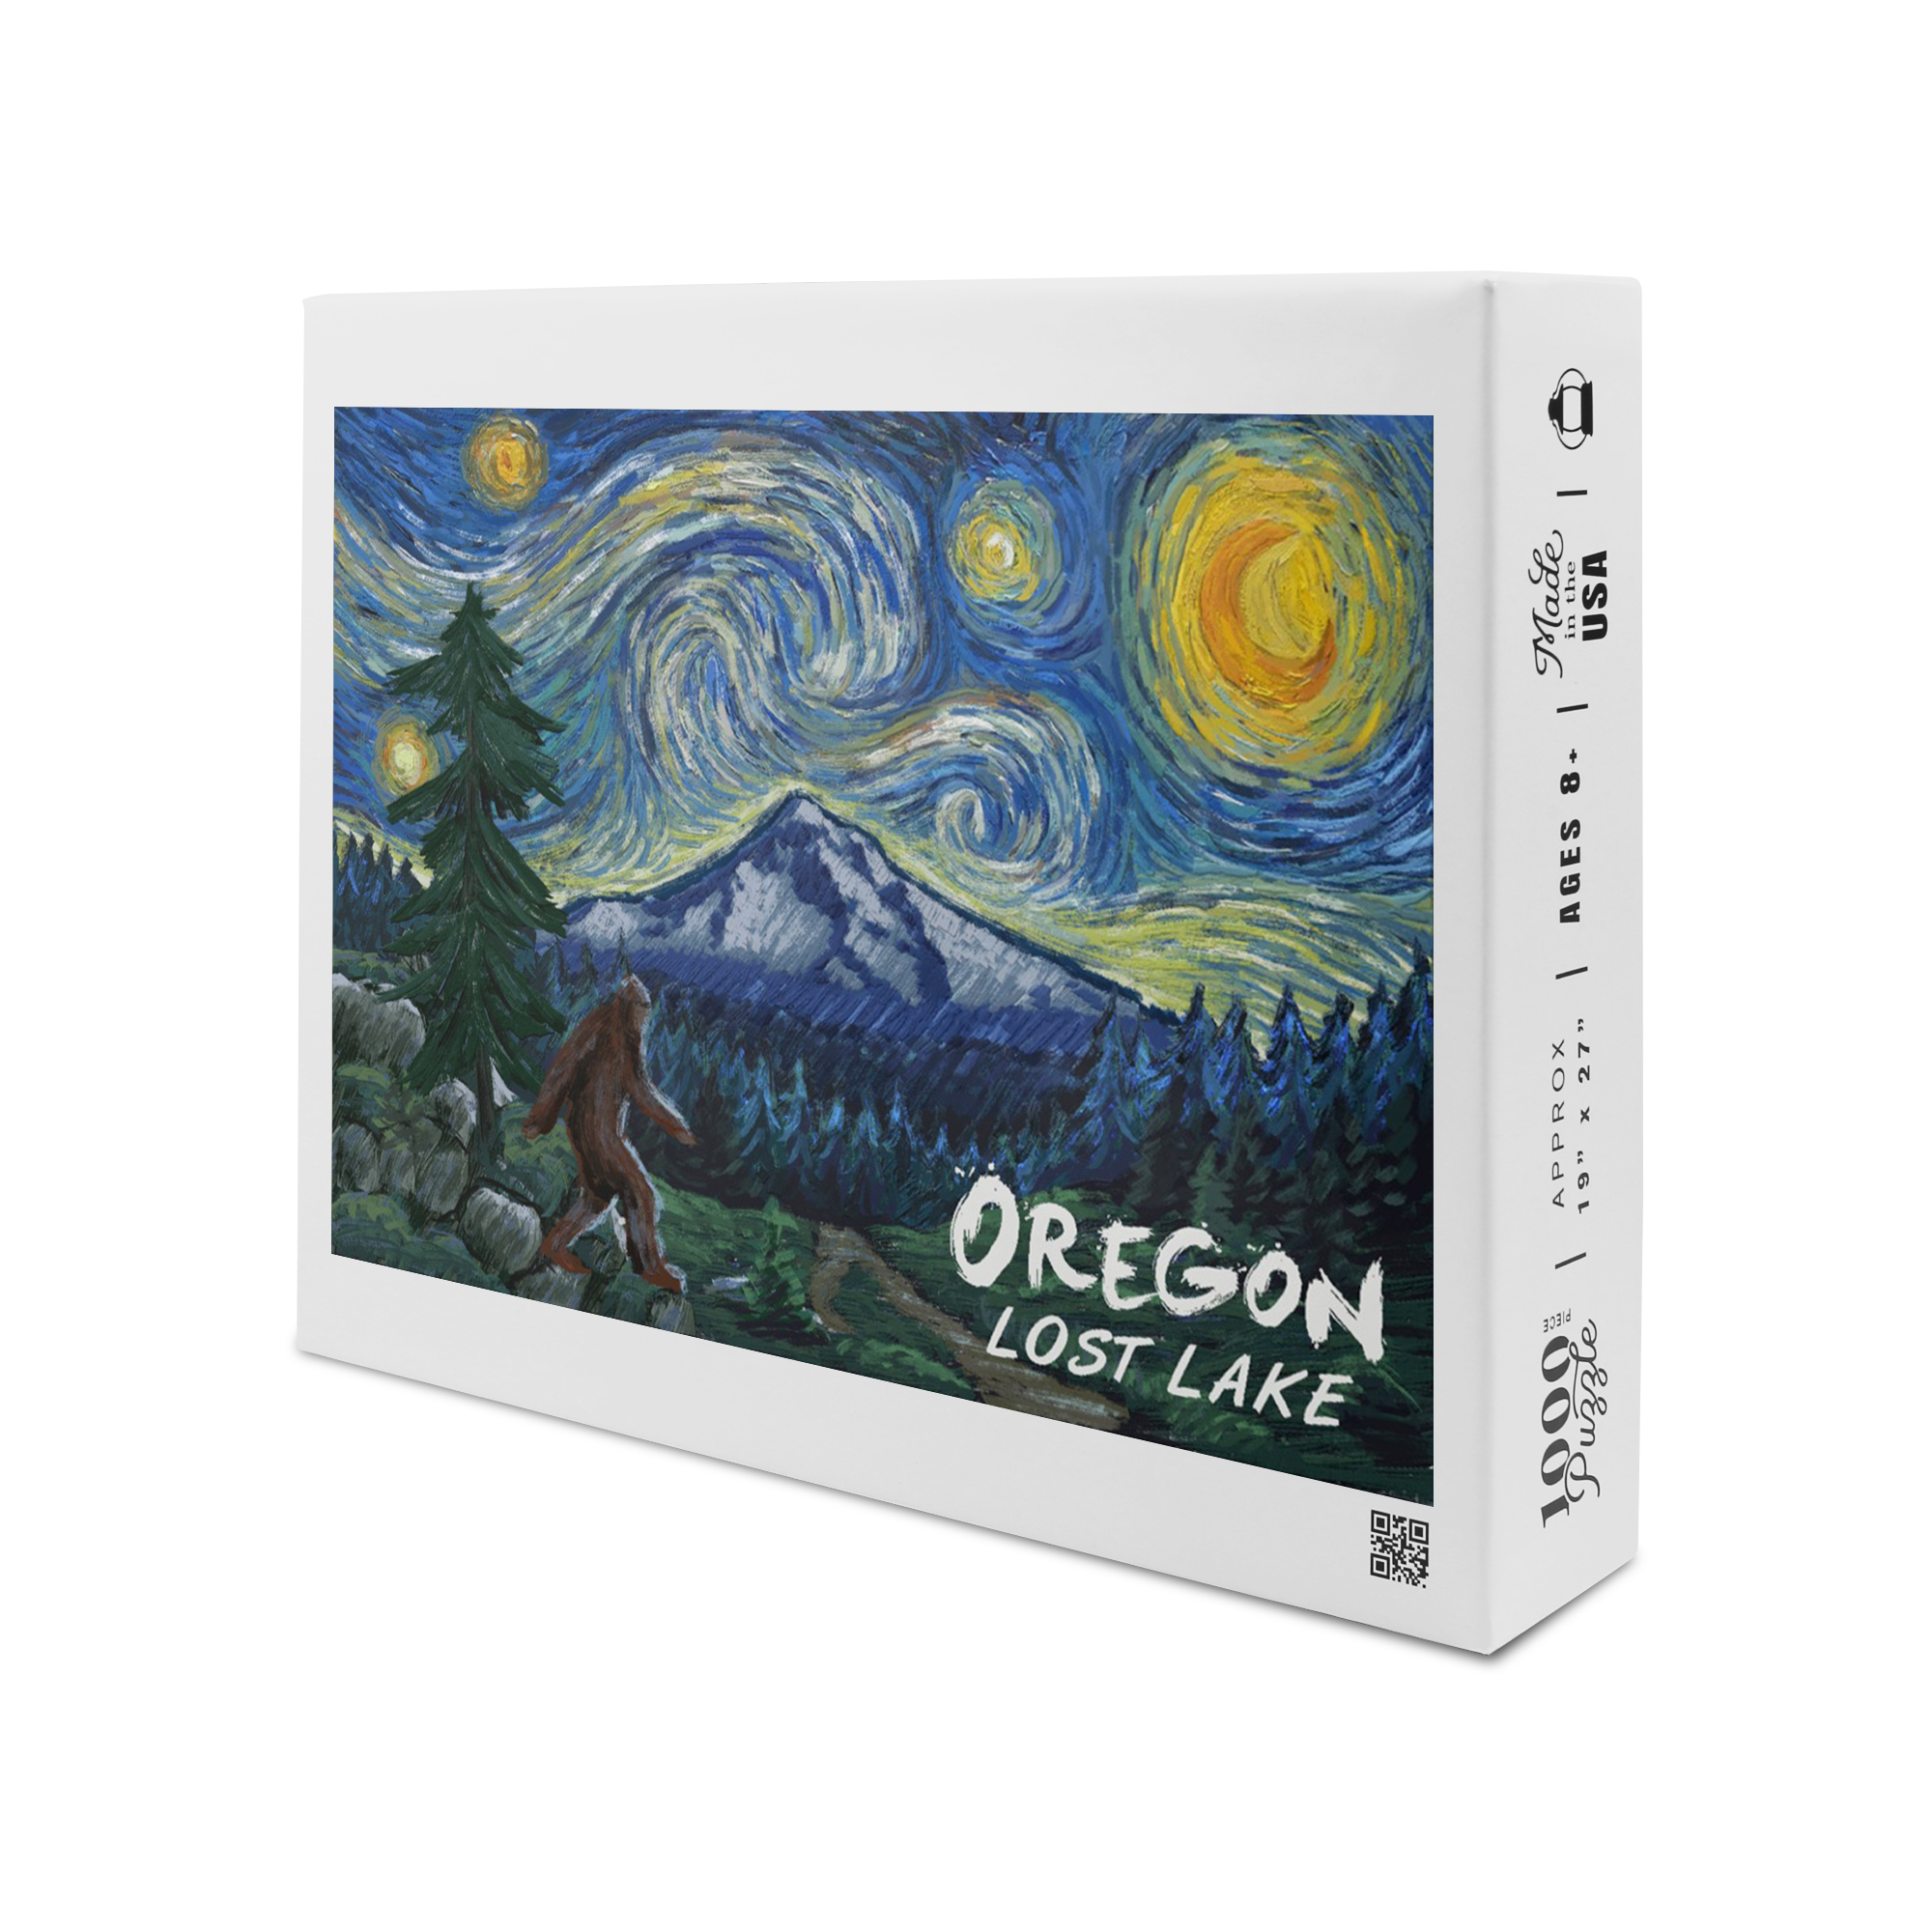 Lost Lake, Oregon, Bigfoot, Mt Hood, Starry Night (1000 Piece Puzzle, Size 19x27, Challenging Jigsaw Puzzle for Adults and Family, Made in USA) - image 2 of 4